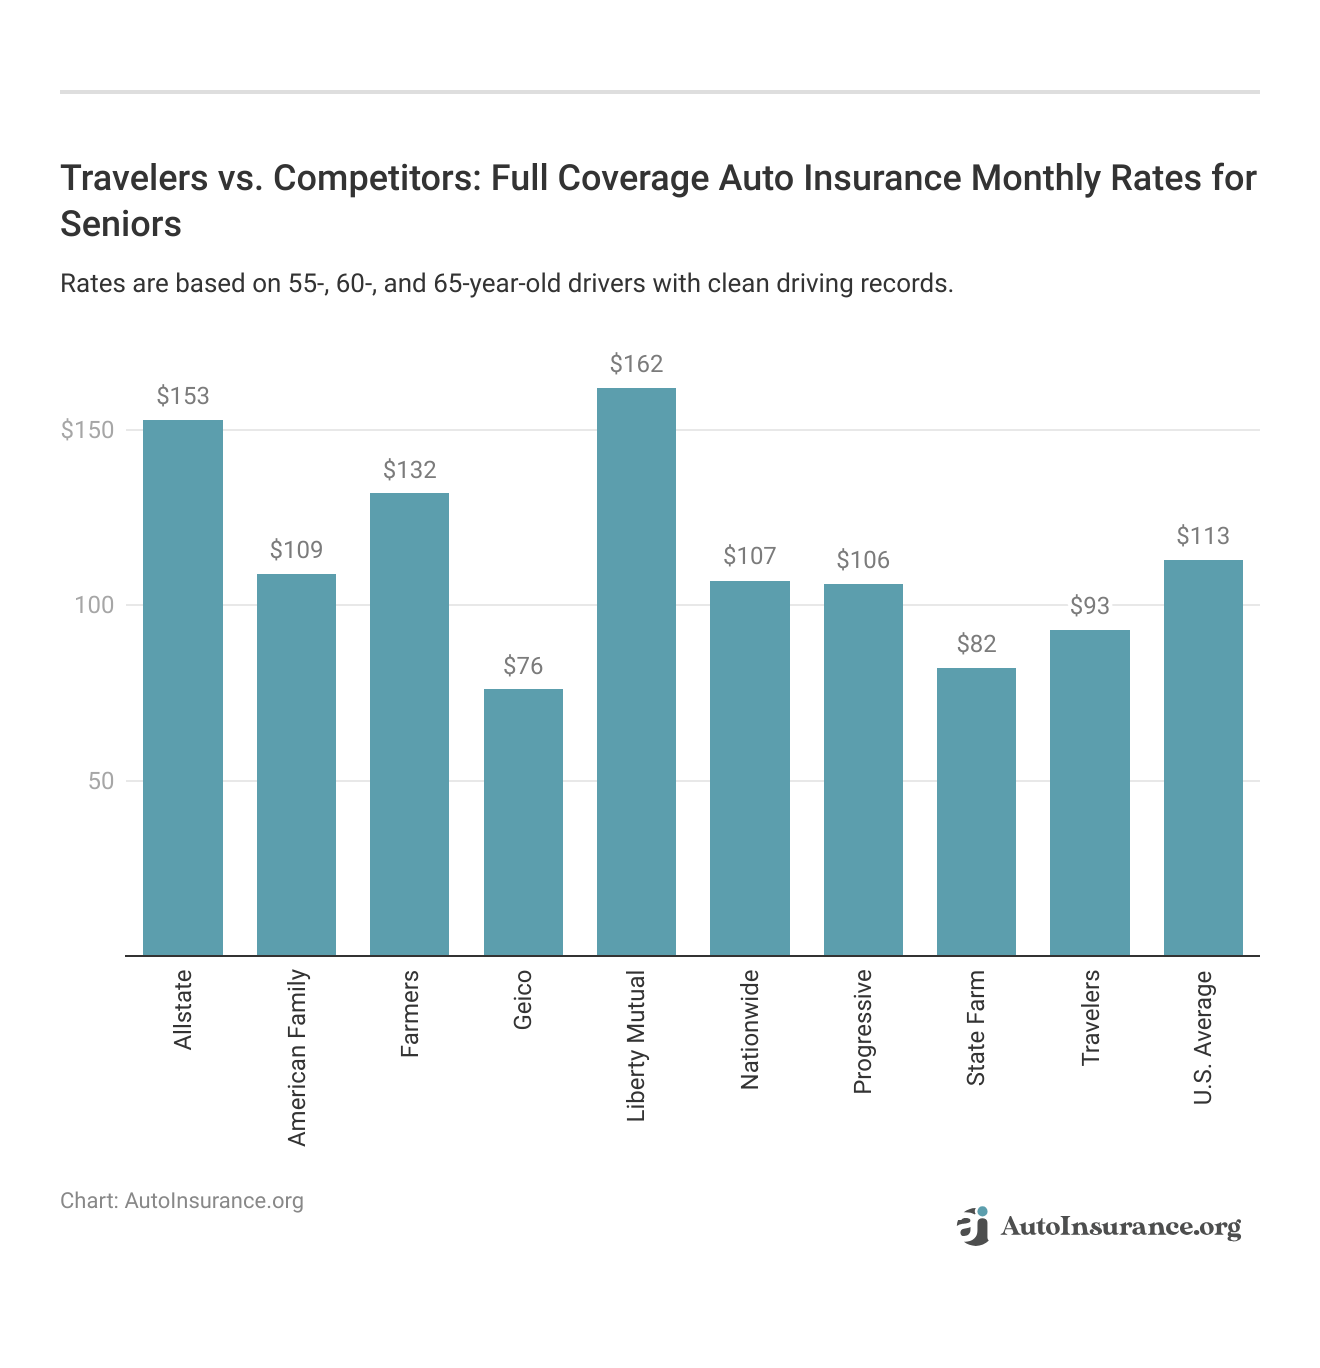 <h3>Travelers vs. Competitors: Full Coverage Auto Insurance Monthly Rates for Seniors</h3>